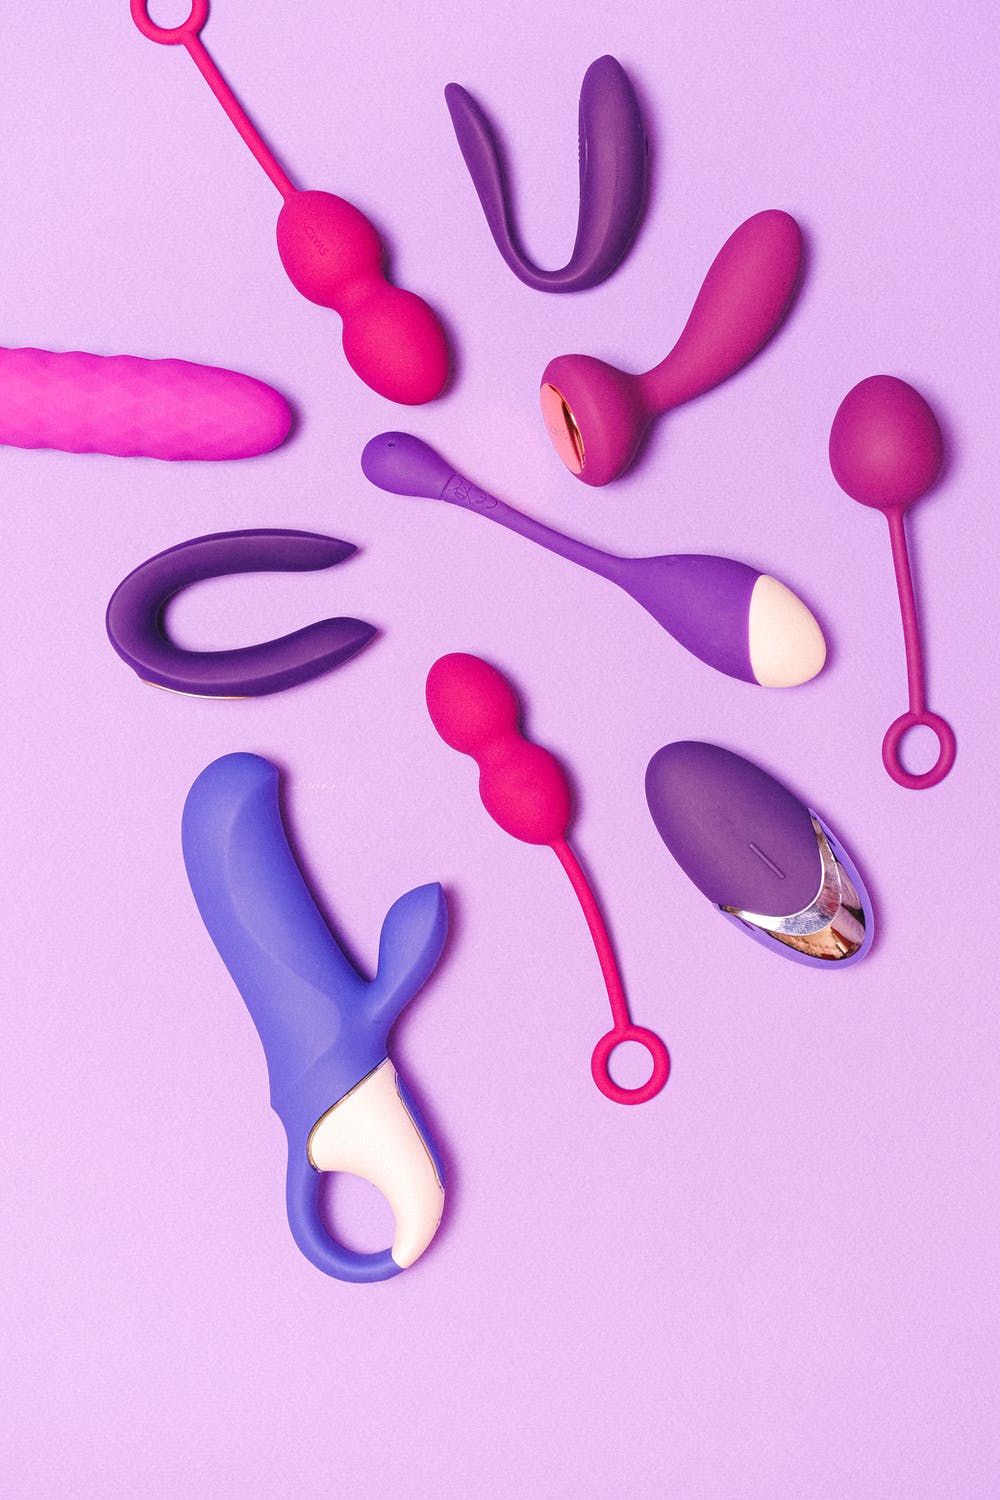 5 Ways to Introduce Sex Toys to a Partner: